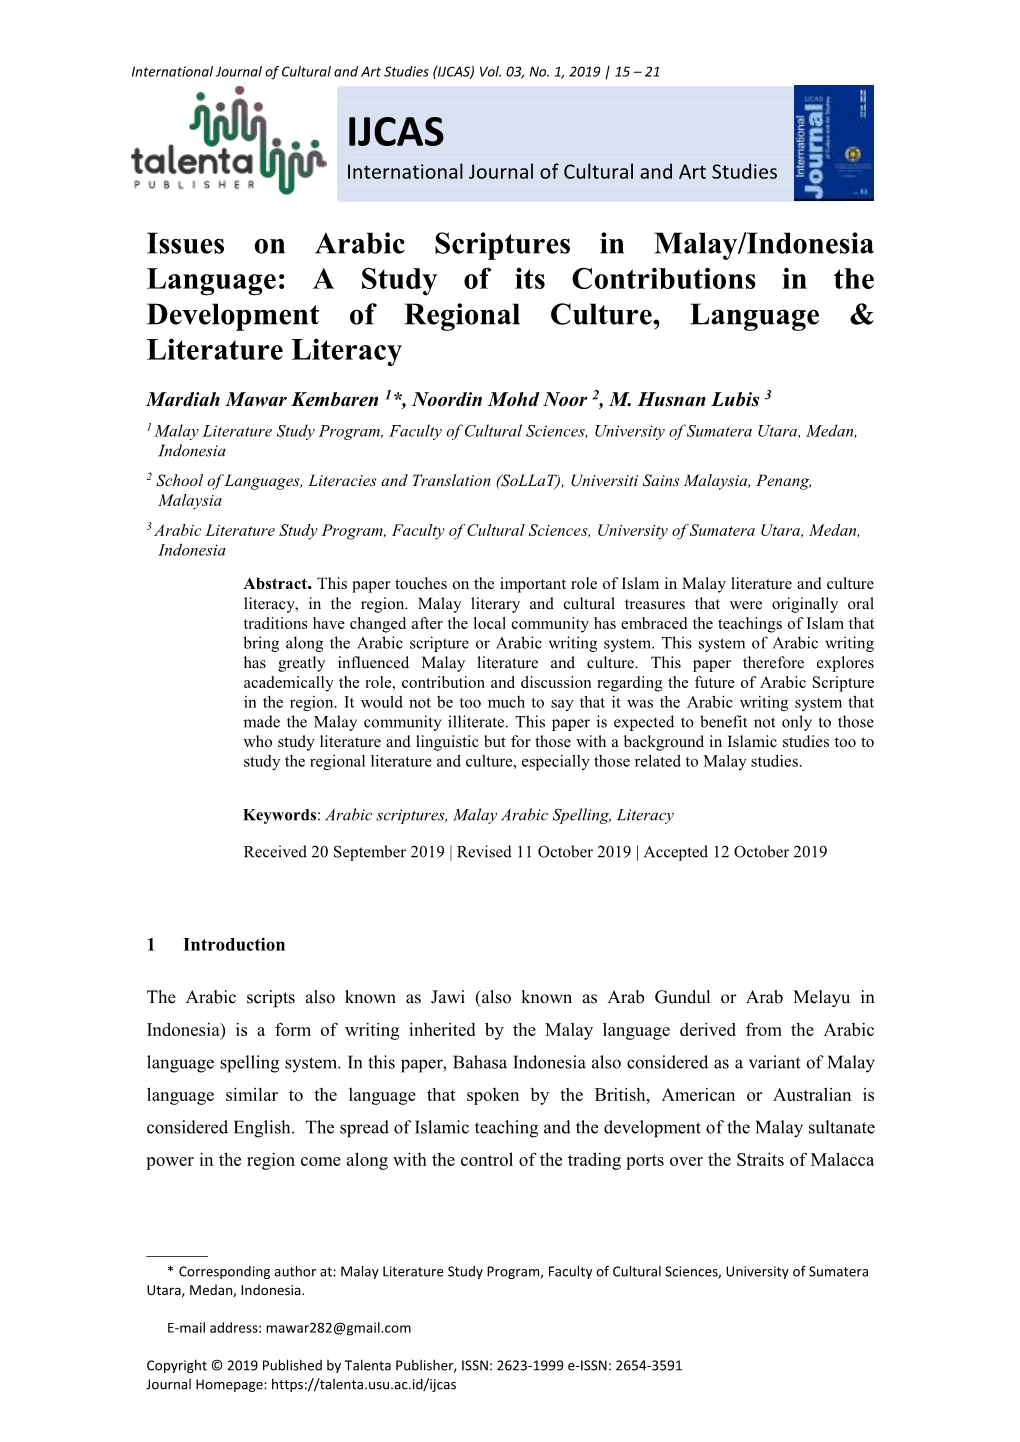 Issues on Arabic Scriptures in Malay/Indonesia Language: a Study of Its Contributions in the Development of Regional Culture, Language & Literature Literacy